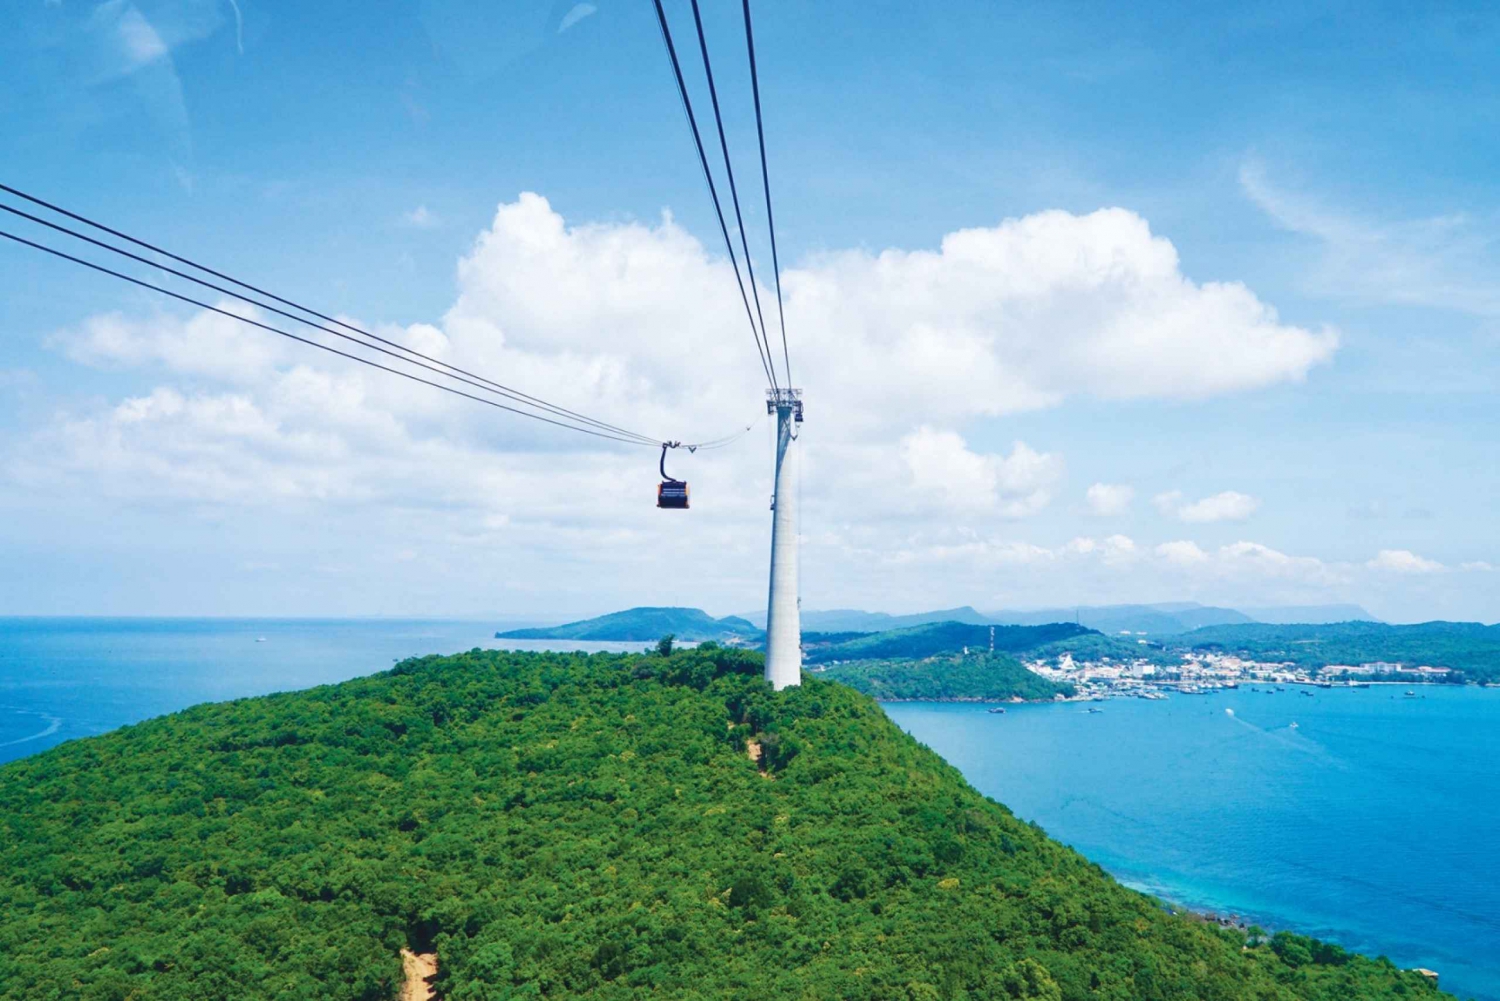 From Duong Dong: Southern Phu Quoc Tour and Cable Car Ride